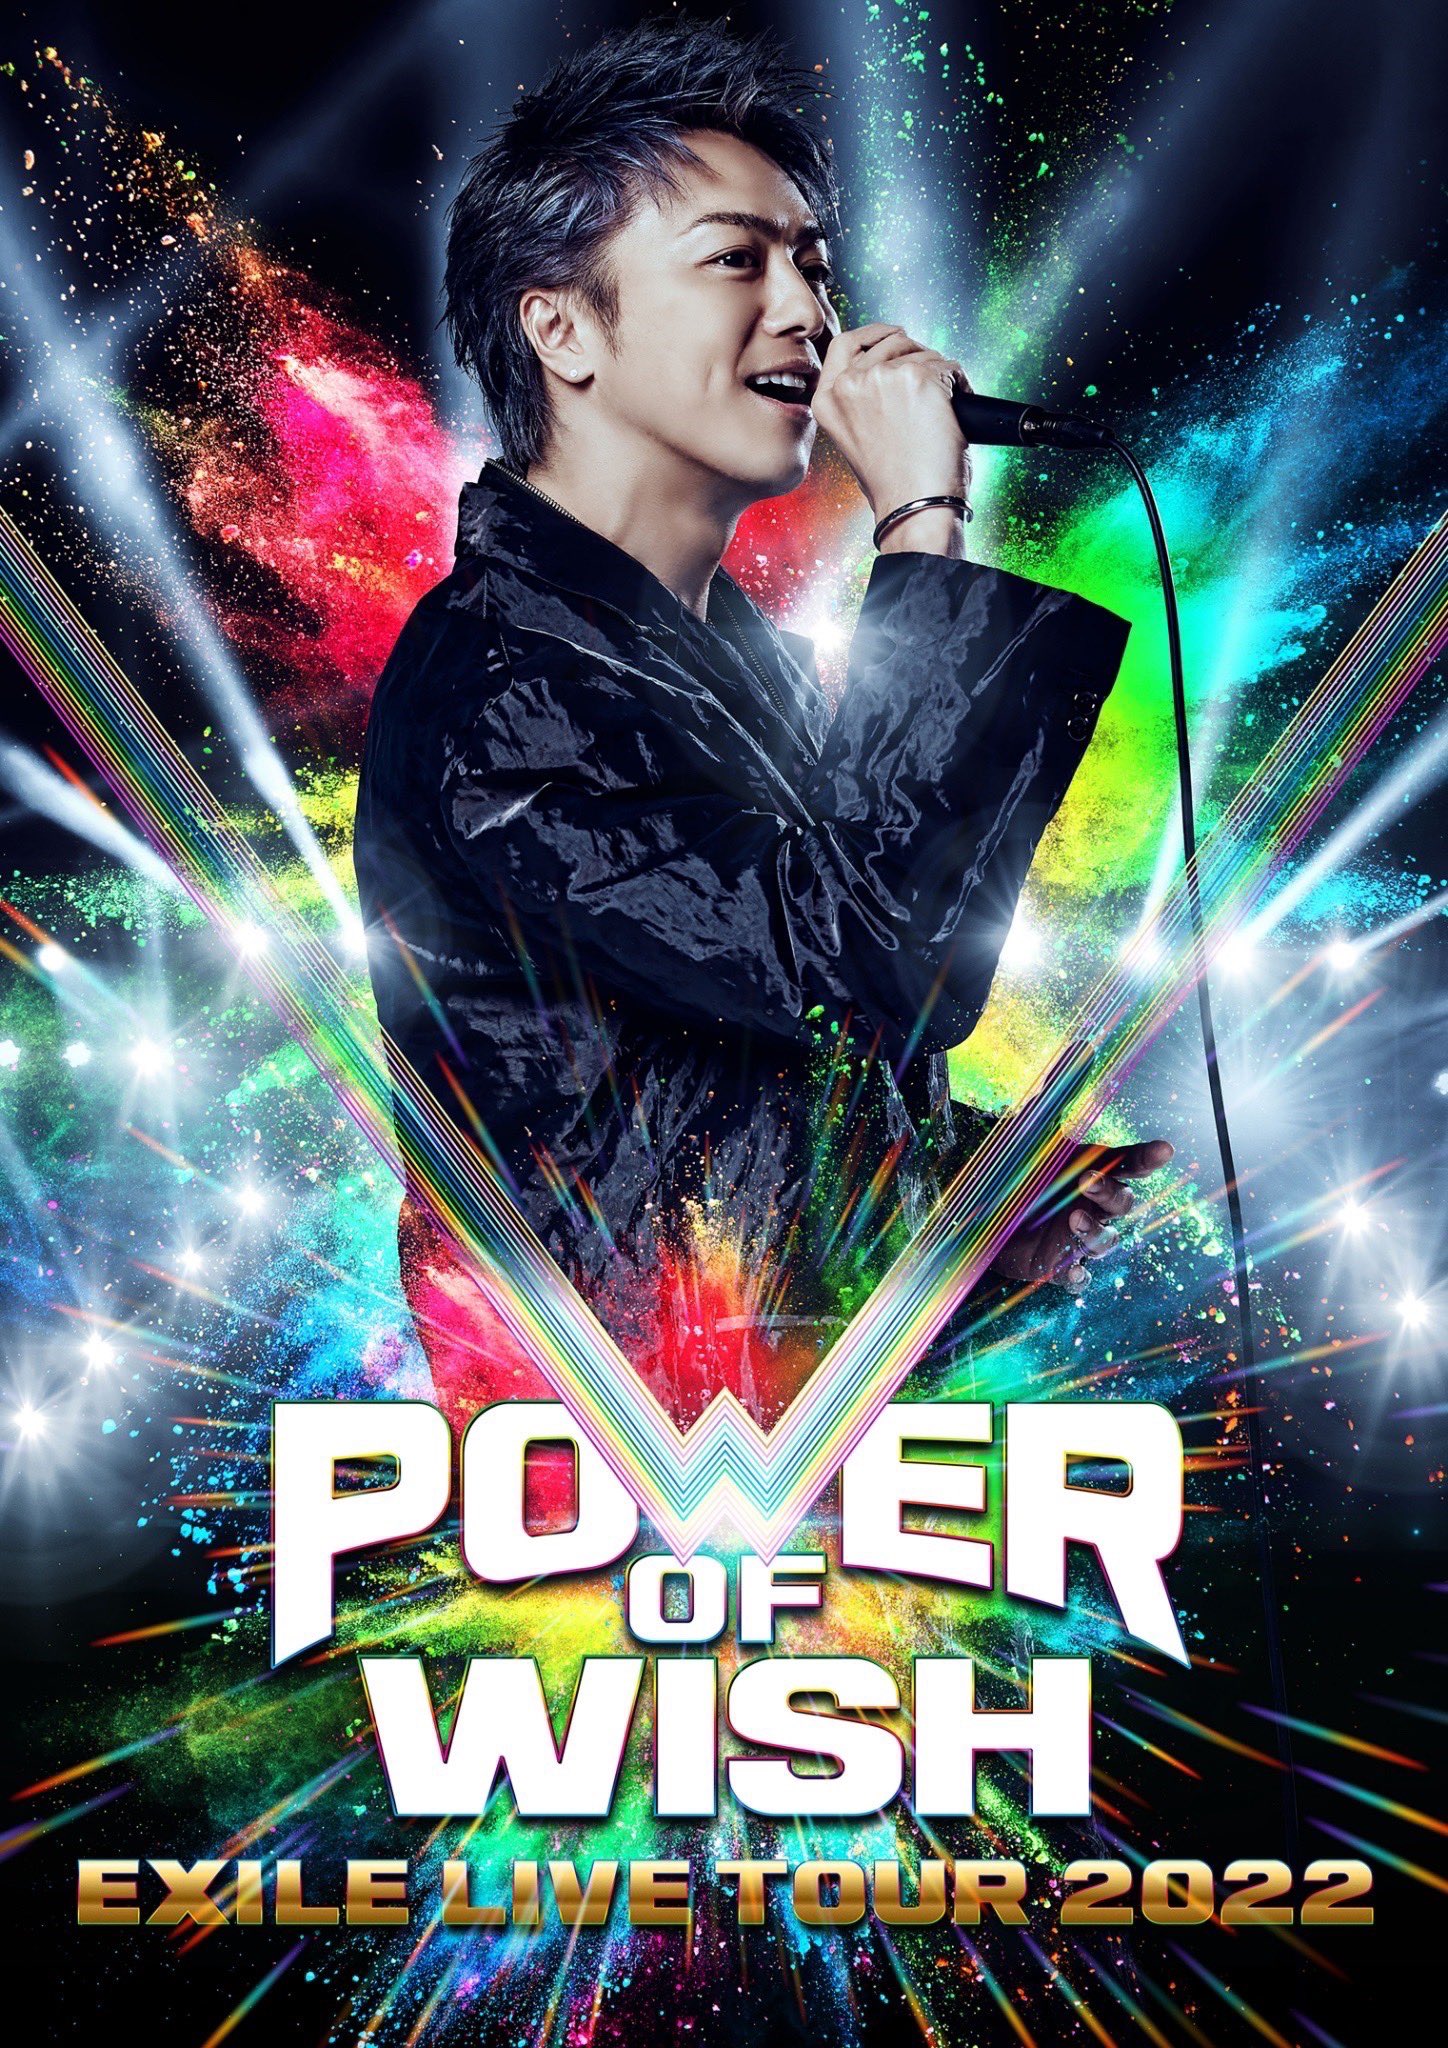 EXILE POWER OF WISH 【初回生産限定盤】(CD+4DVD)